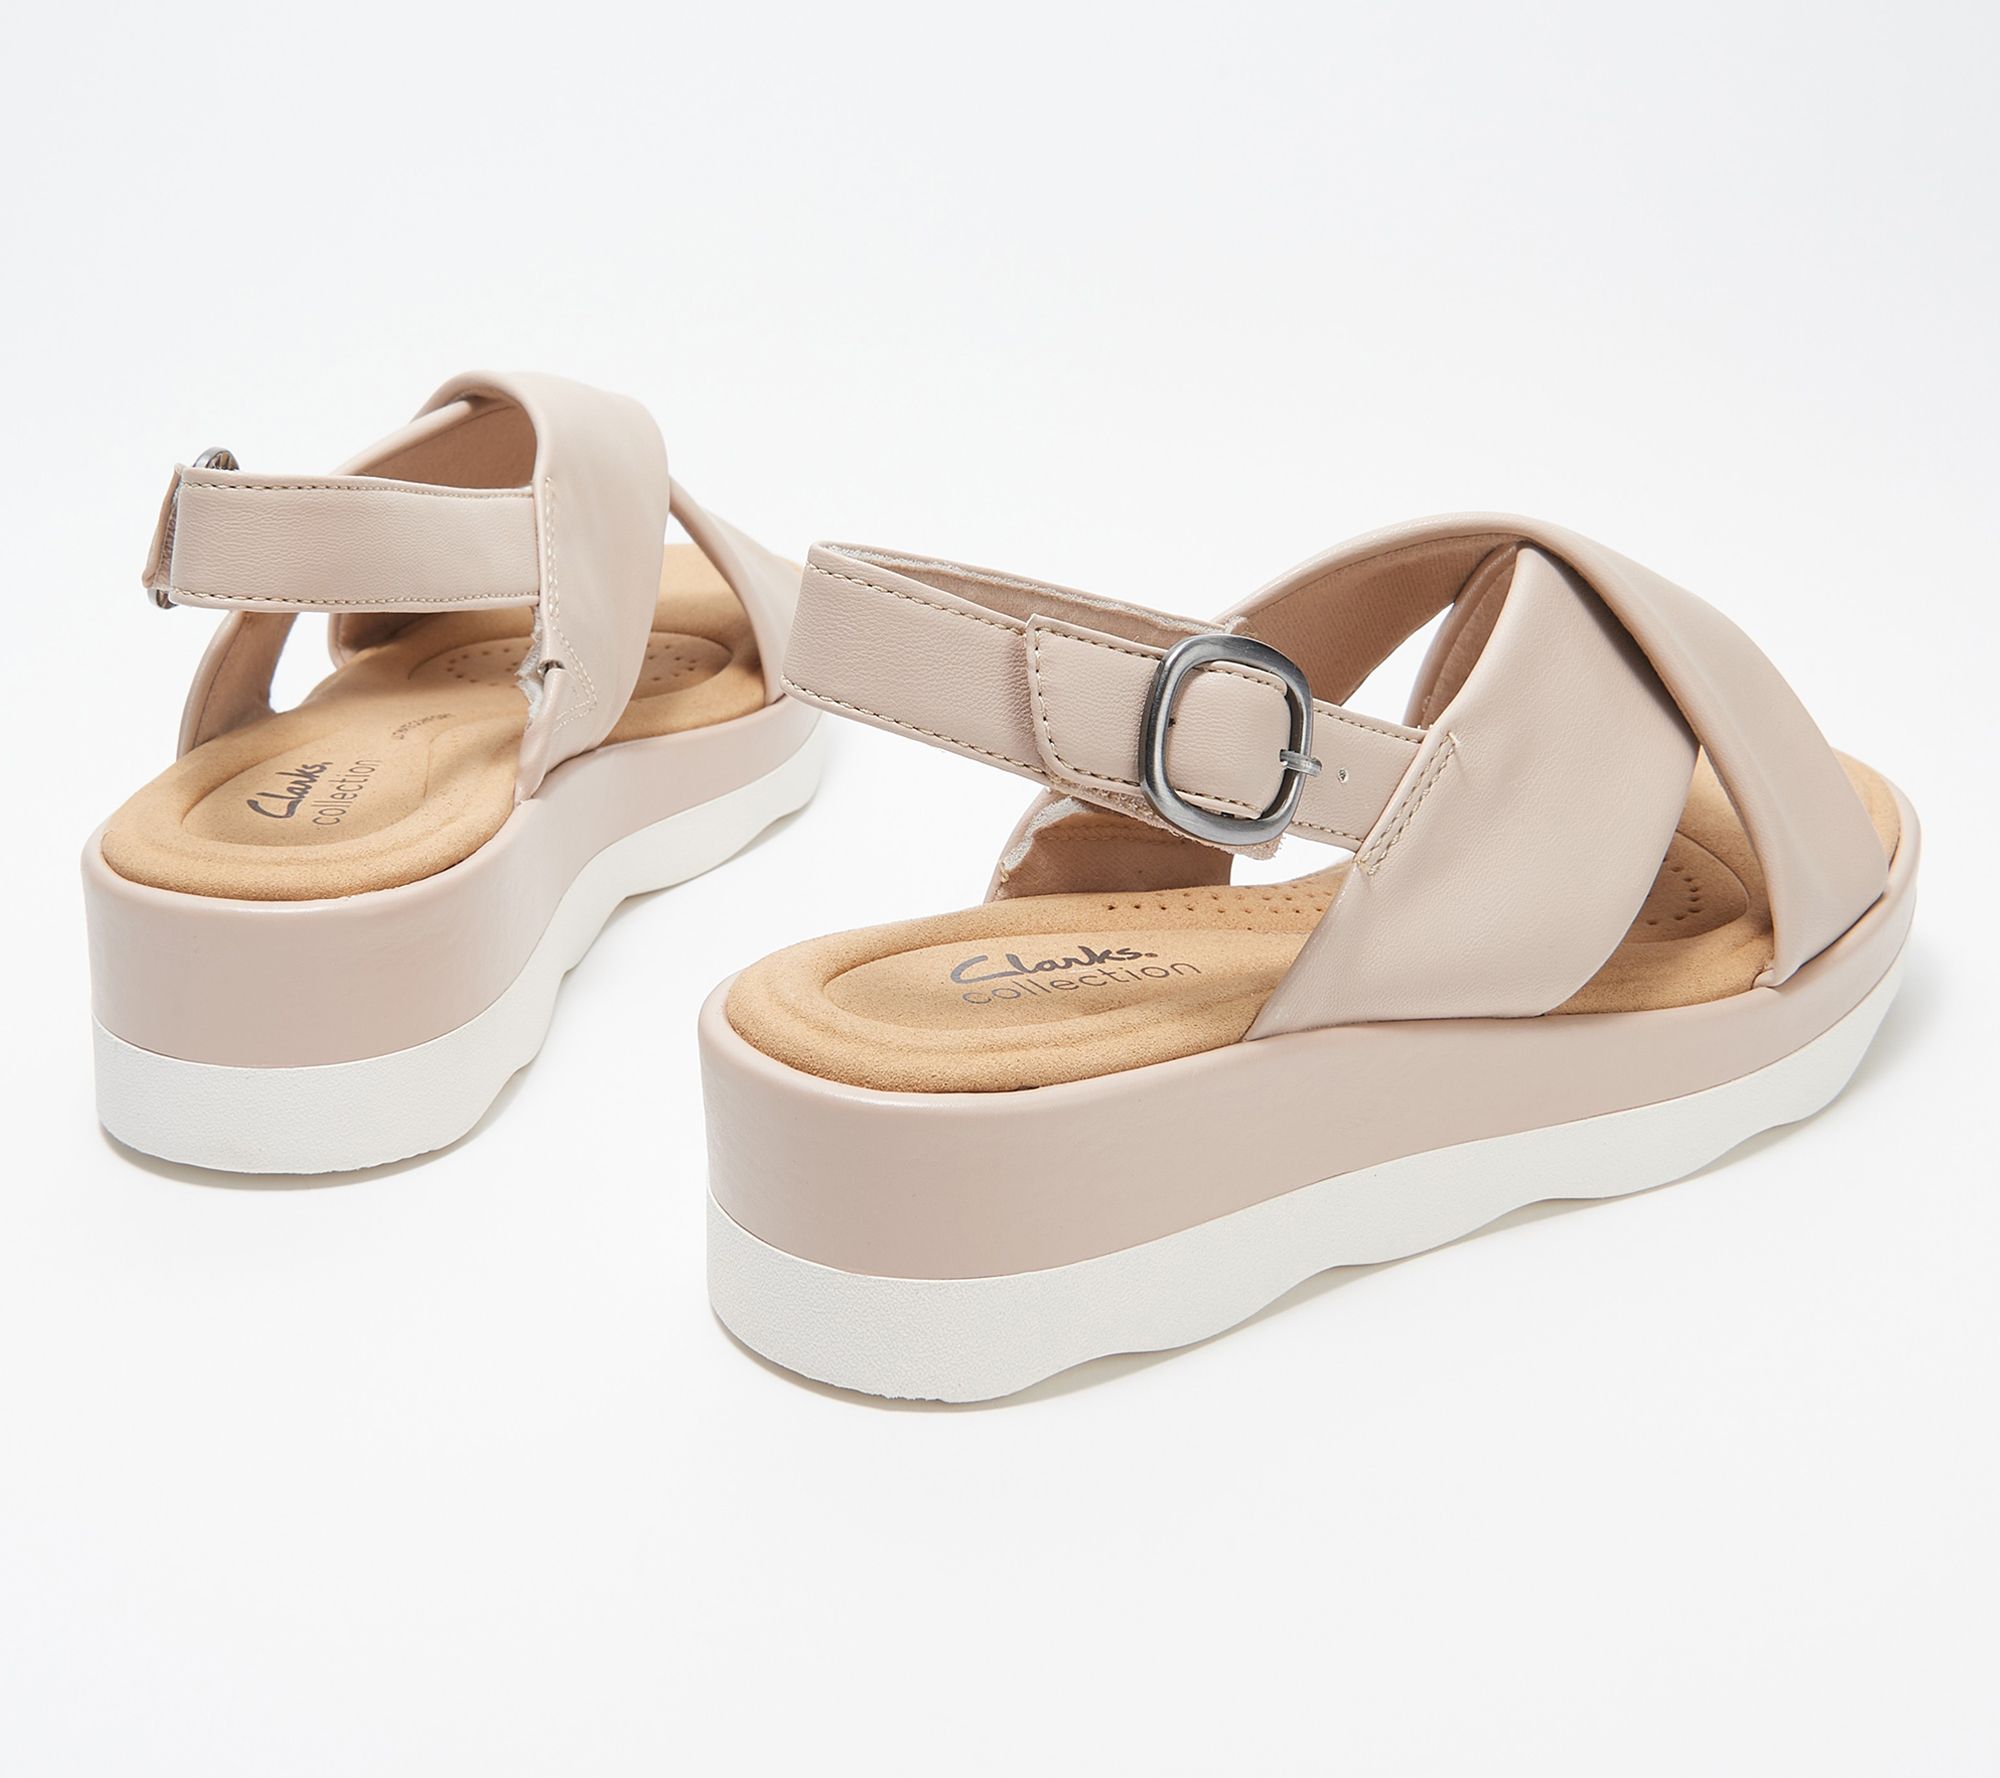 Clarks Collection Cross Band Wedges - Clara Cove - QVC.com